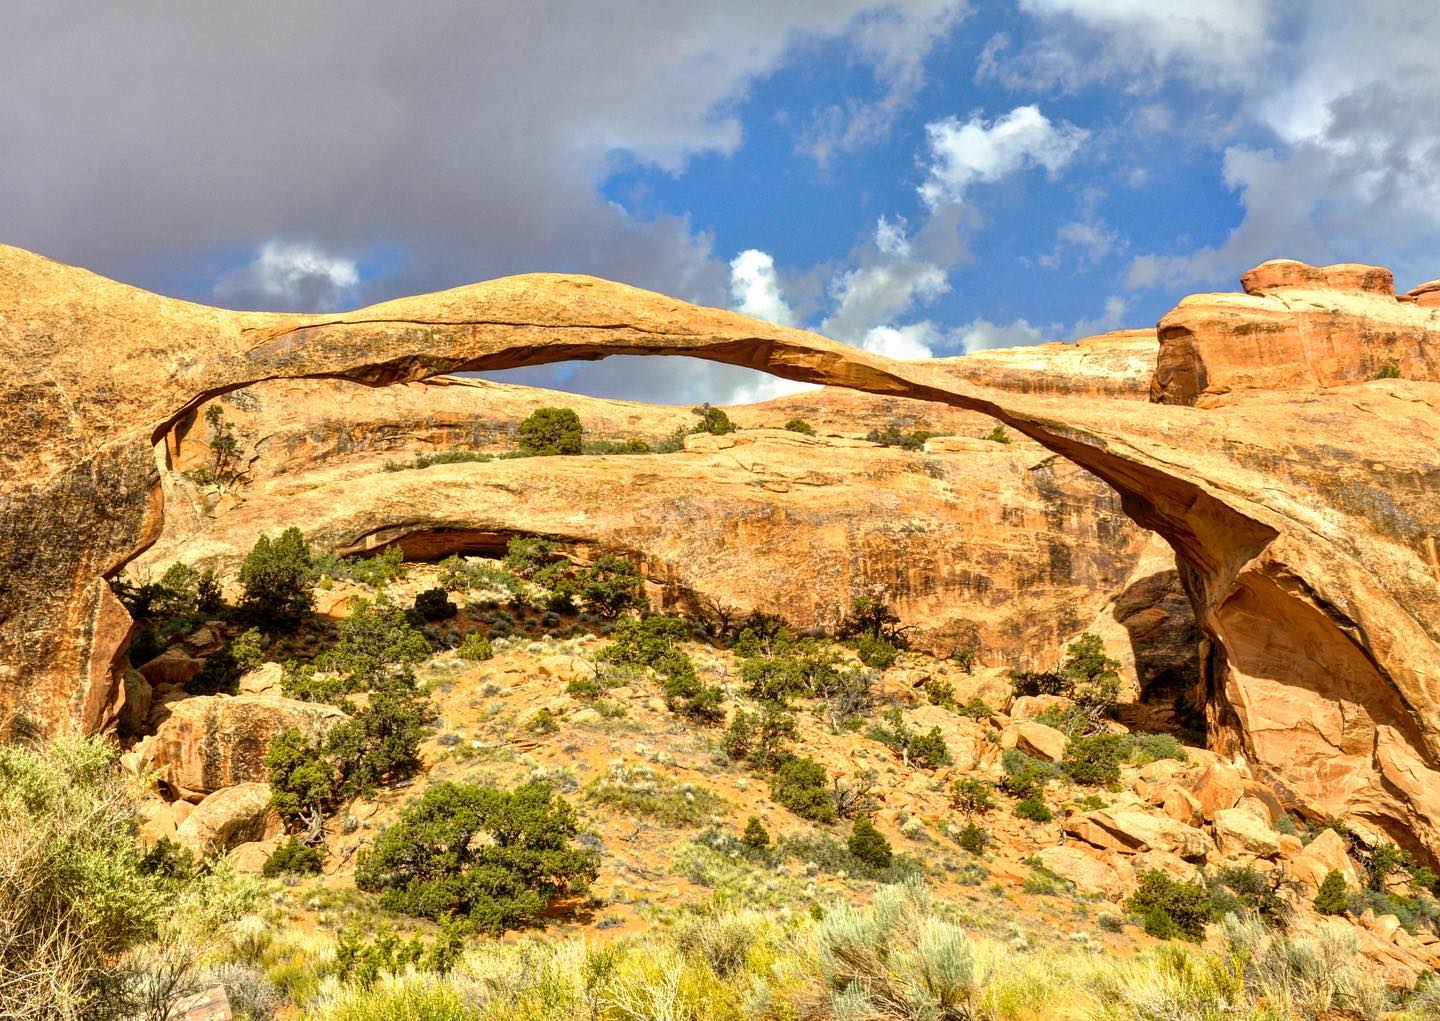 Landscape Arch, Arches National Park, Utah
Morning Hike to Landscape Arch, one of the world's longest stone spans. It's a easy two mile hike (out and back). 
Arches NP is one of our favorite parks.
#usatravels #usanationalparks #roadtripusa🇺🇸 #visittheusa #visitthestates #utah #utahgram #utahunique #utahphotographer #travelgram #travelphotography #travelblog #travelblogger #archesnationalpark #arches #landscapelovers #landscape #landscapearch #nature #naturelovers #naturephotography #hiking #beautifulworld #uniqueplaces #instatravel